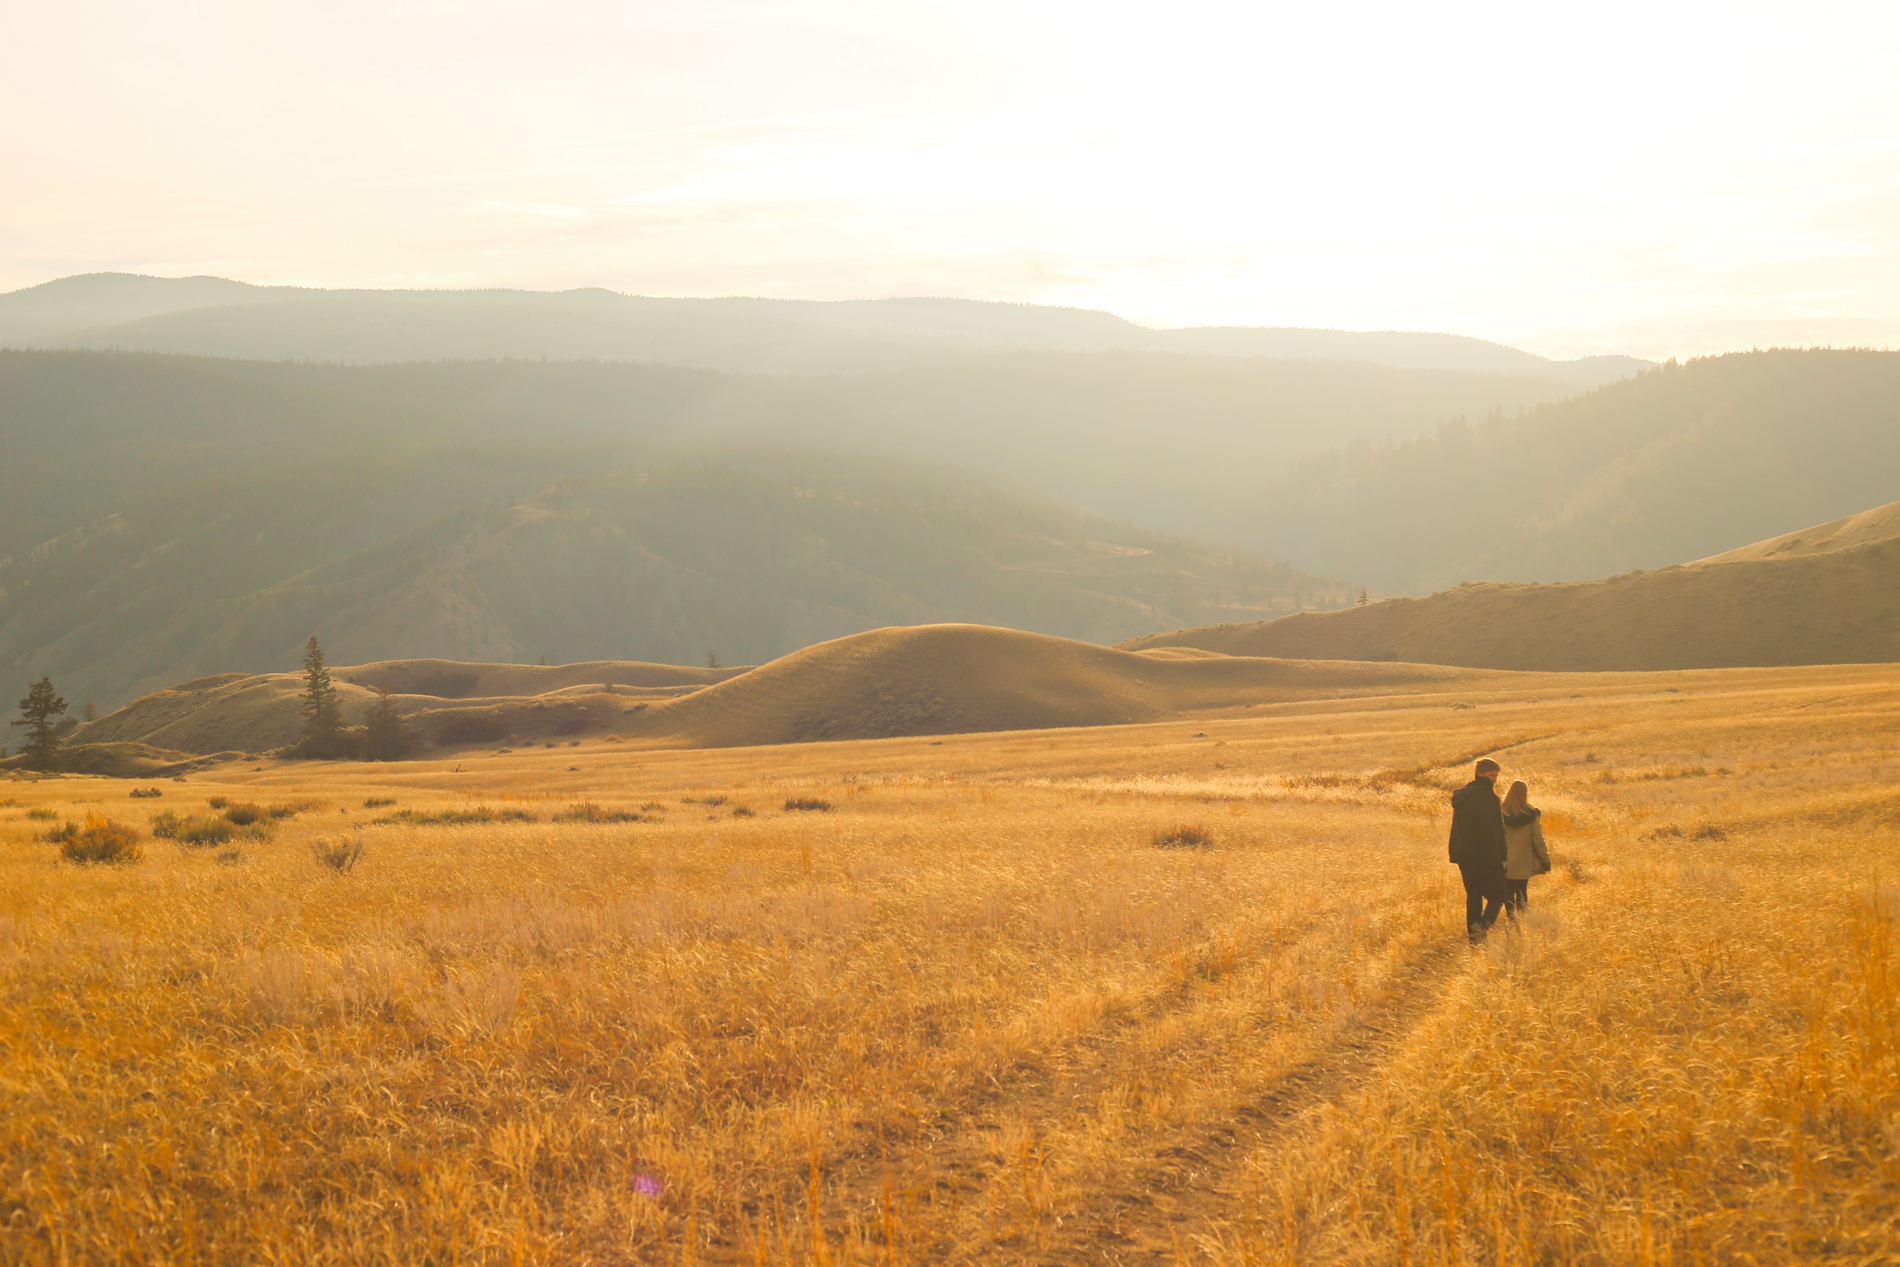 A golden grassy field with low rolling hills in the distance. Two people walk through the field facing away from the camera.